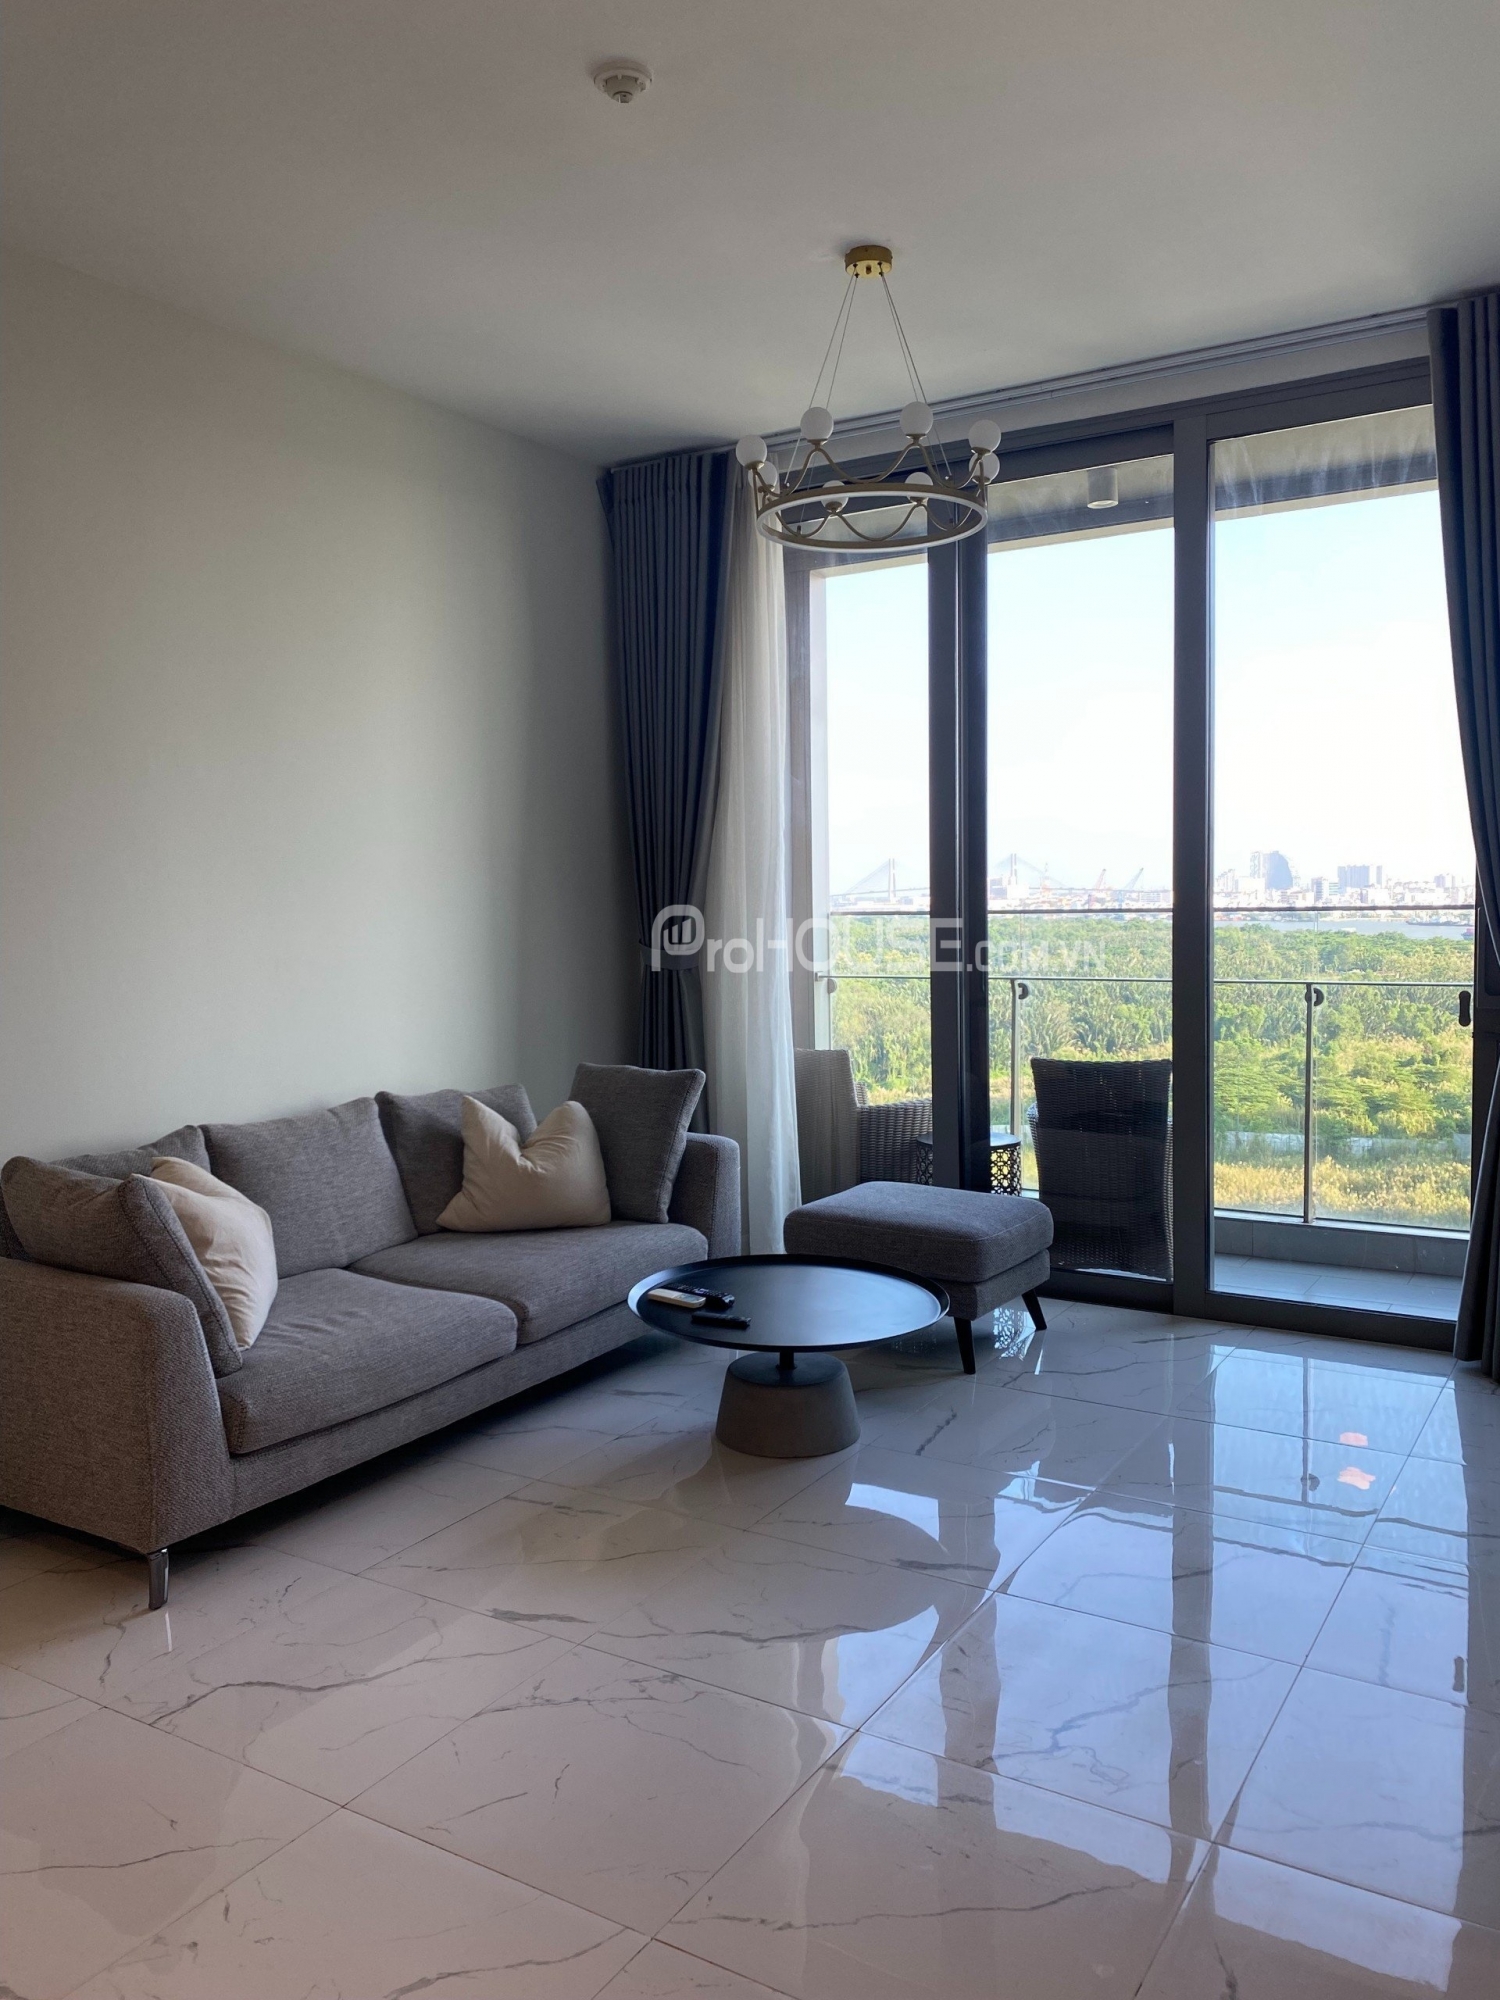 Empire City 2 bedrooms apartment for rent with modern design